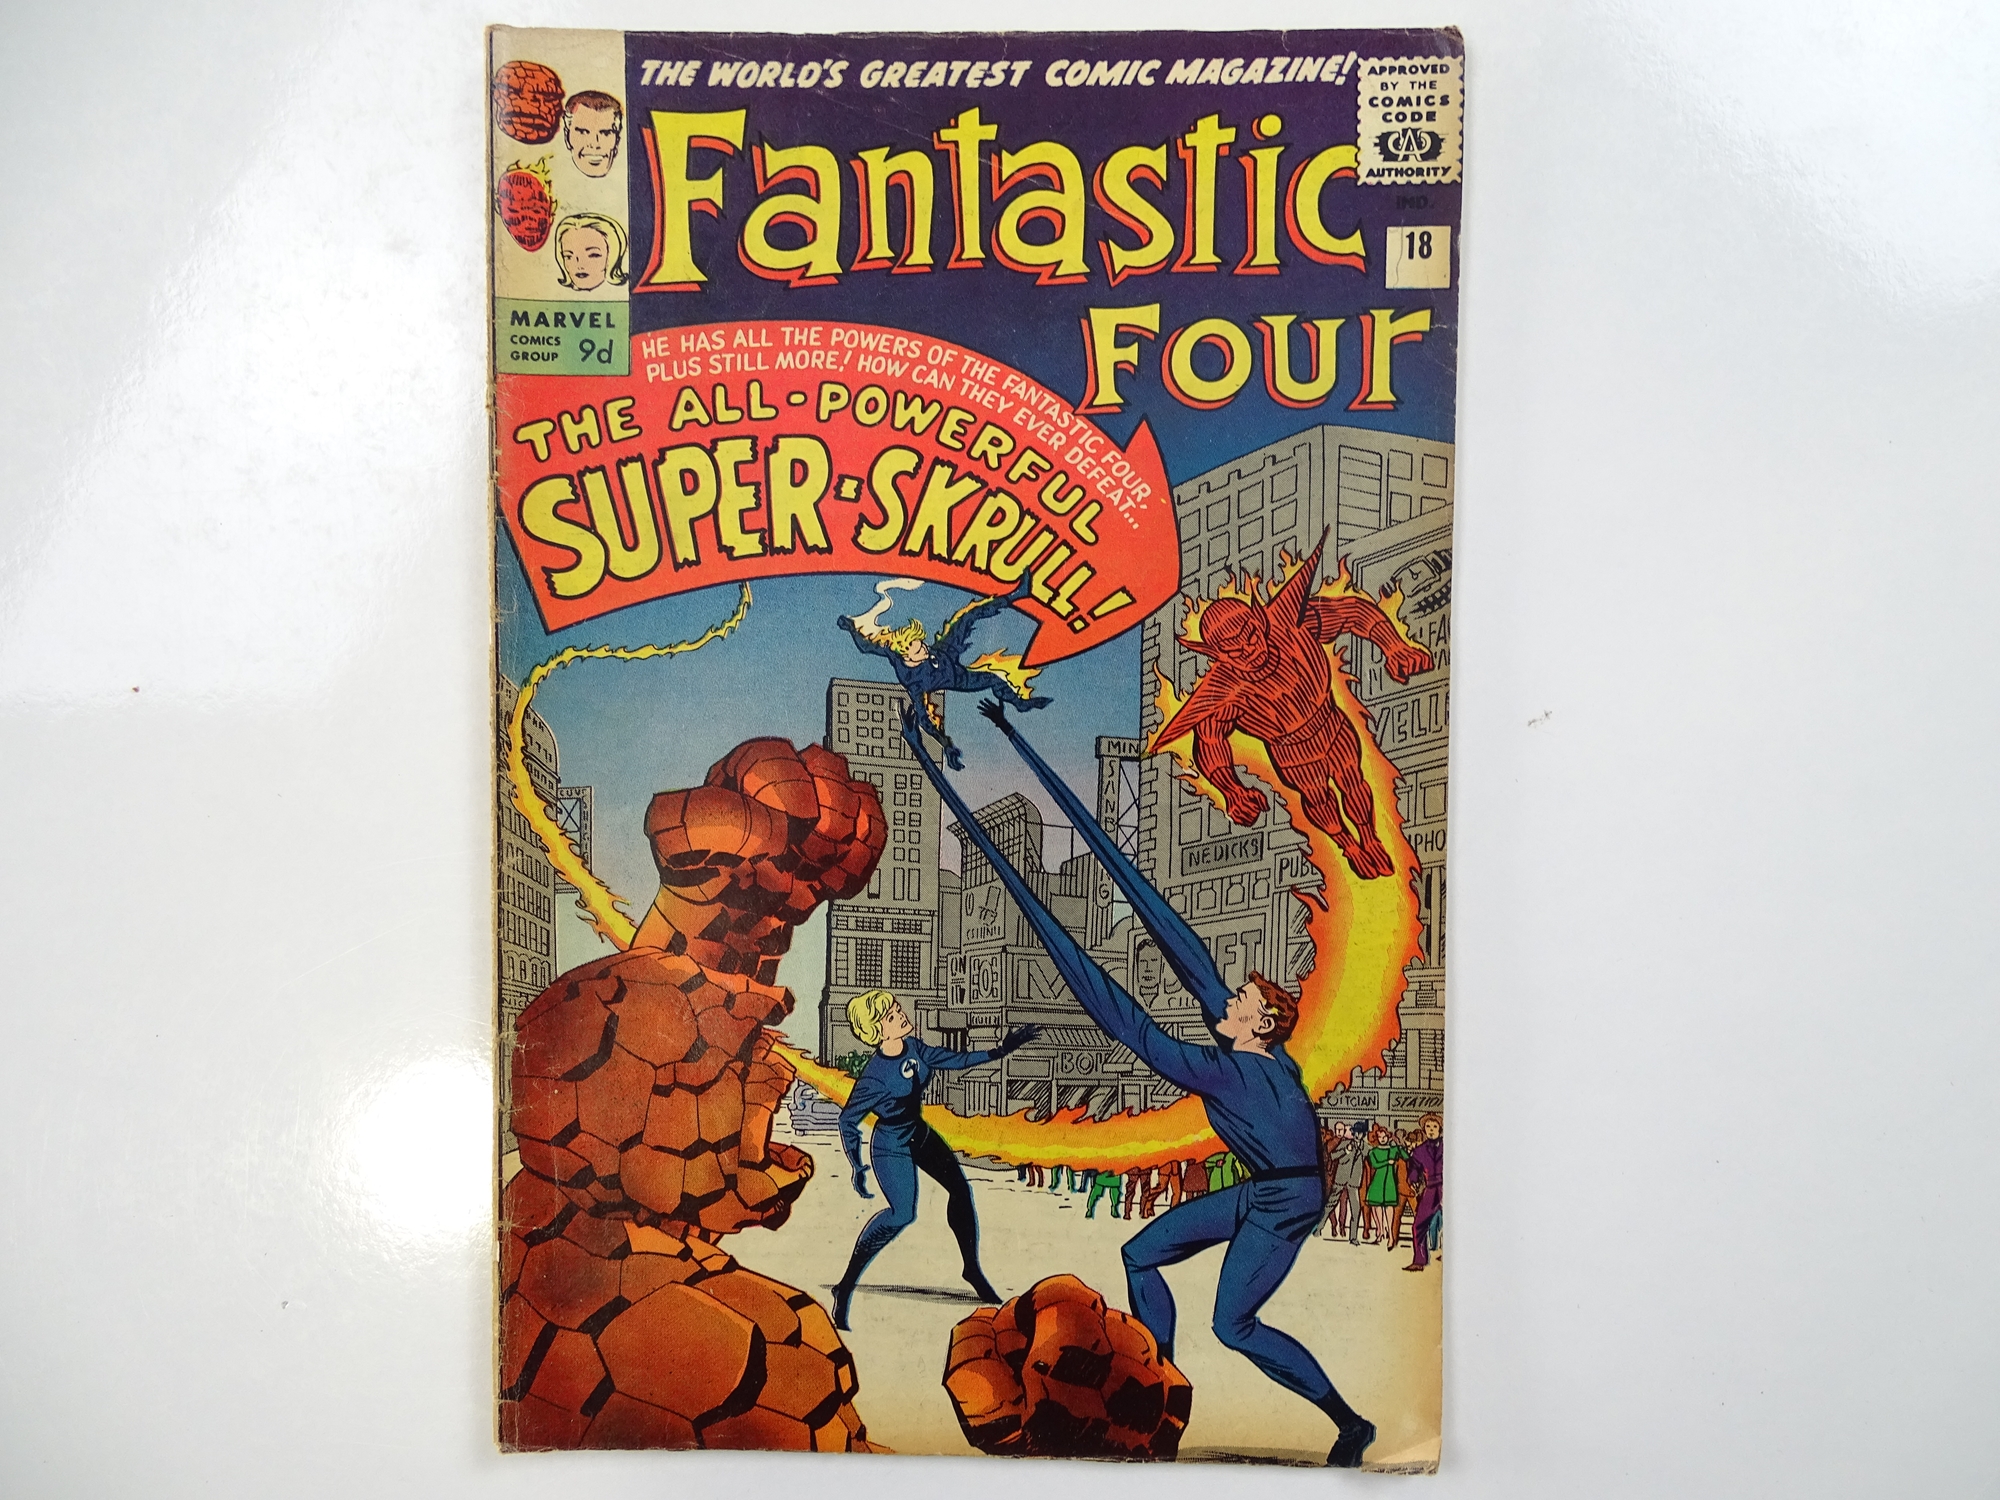 FANTASTIC FOUR #18 - (1963 - MARVEL - UK Price Variant) - Origin and first appearance of the Super-